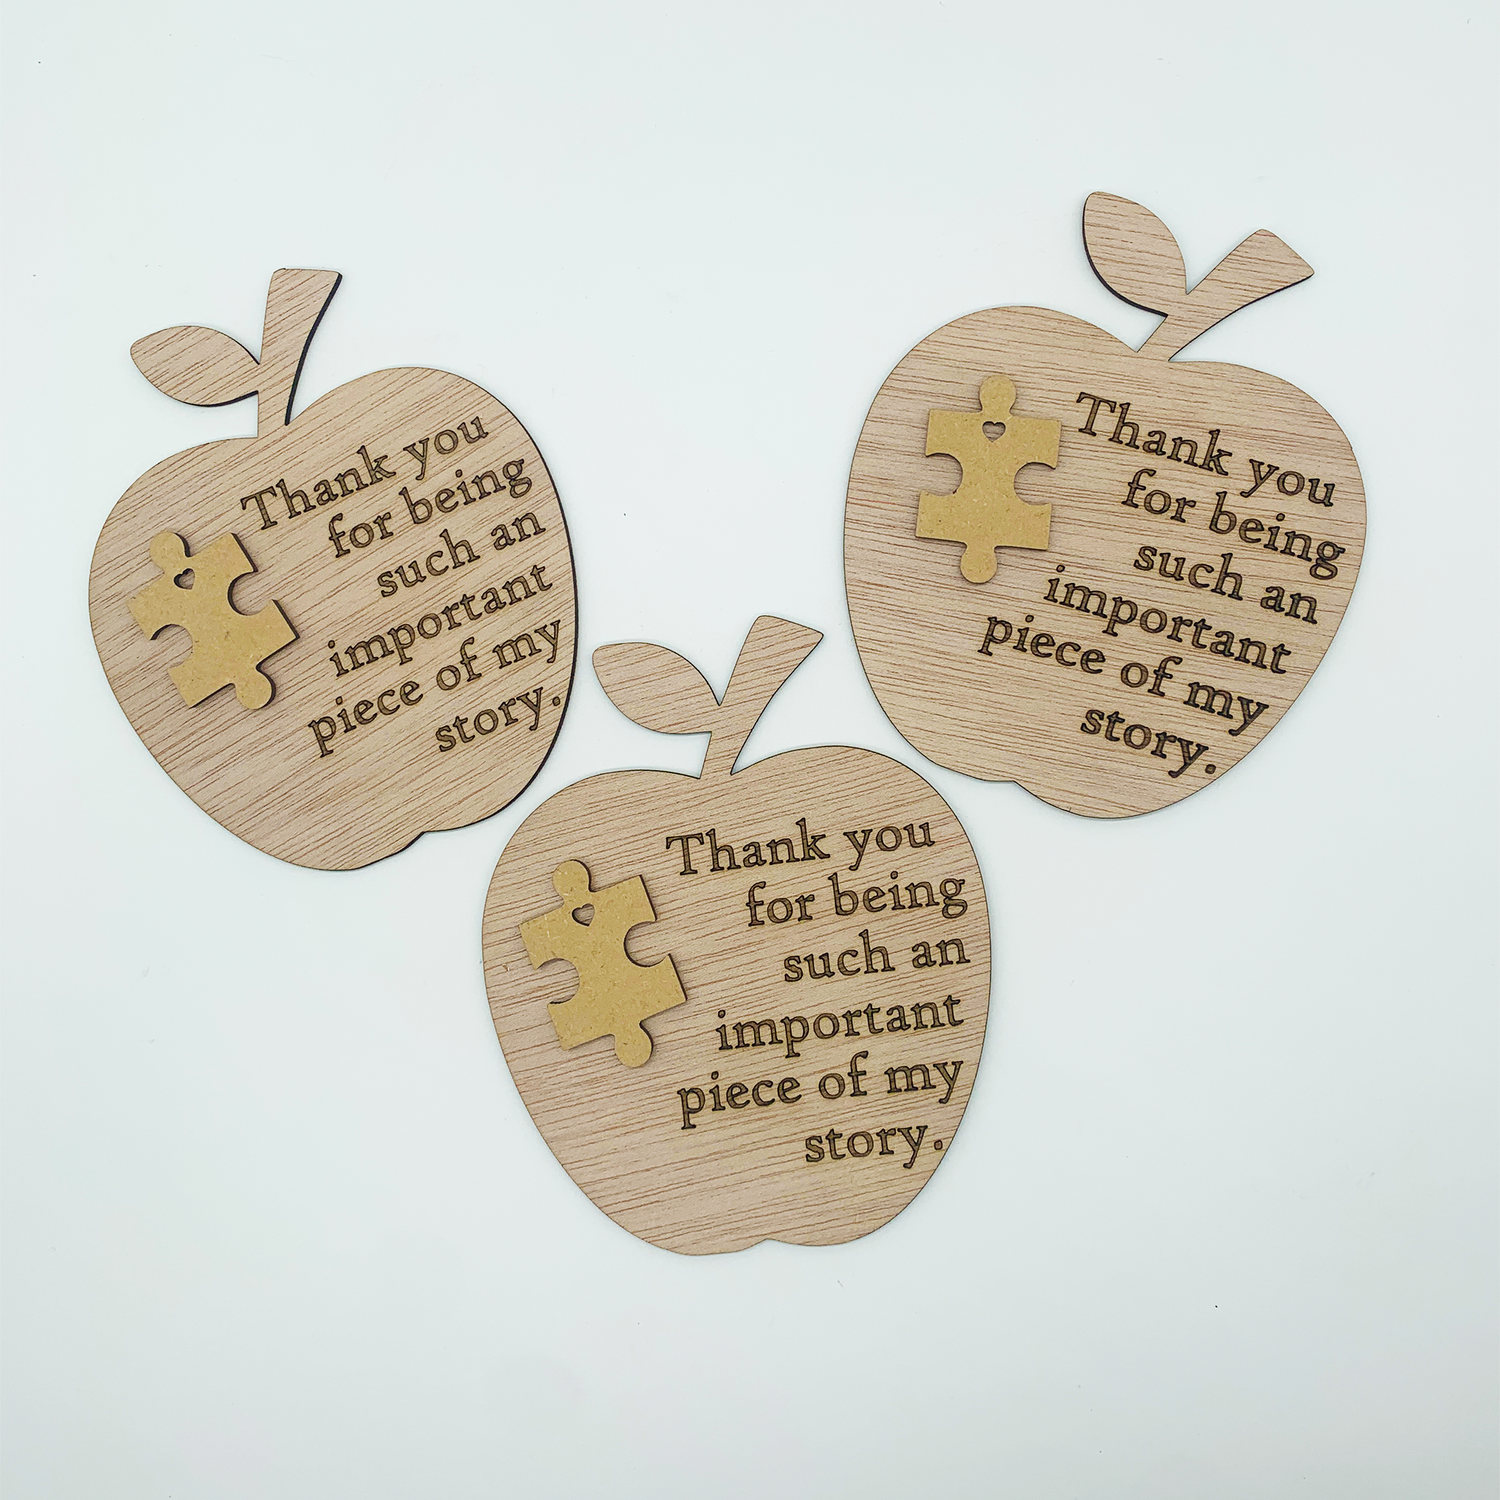 Engraved apple cutout with engraving and puzzle